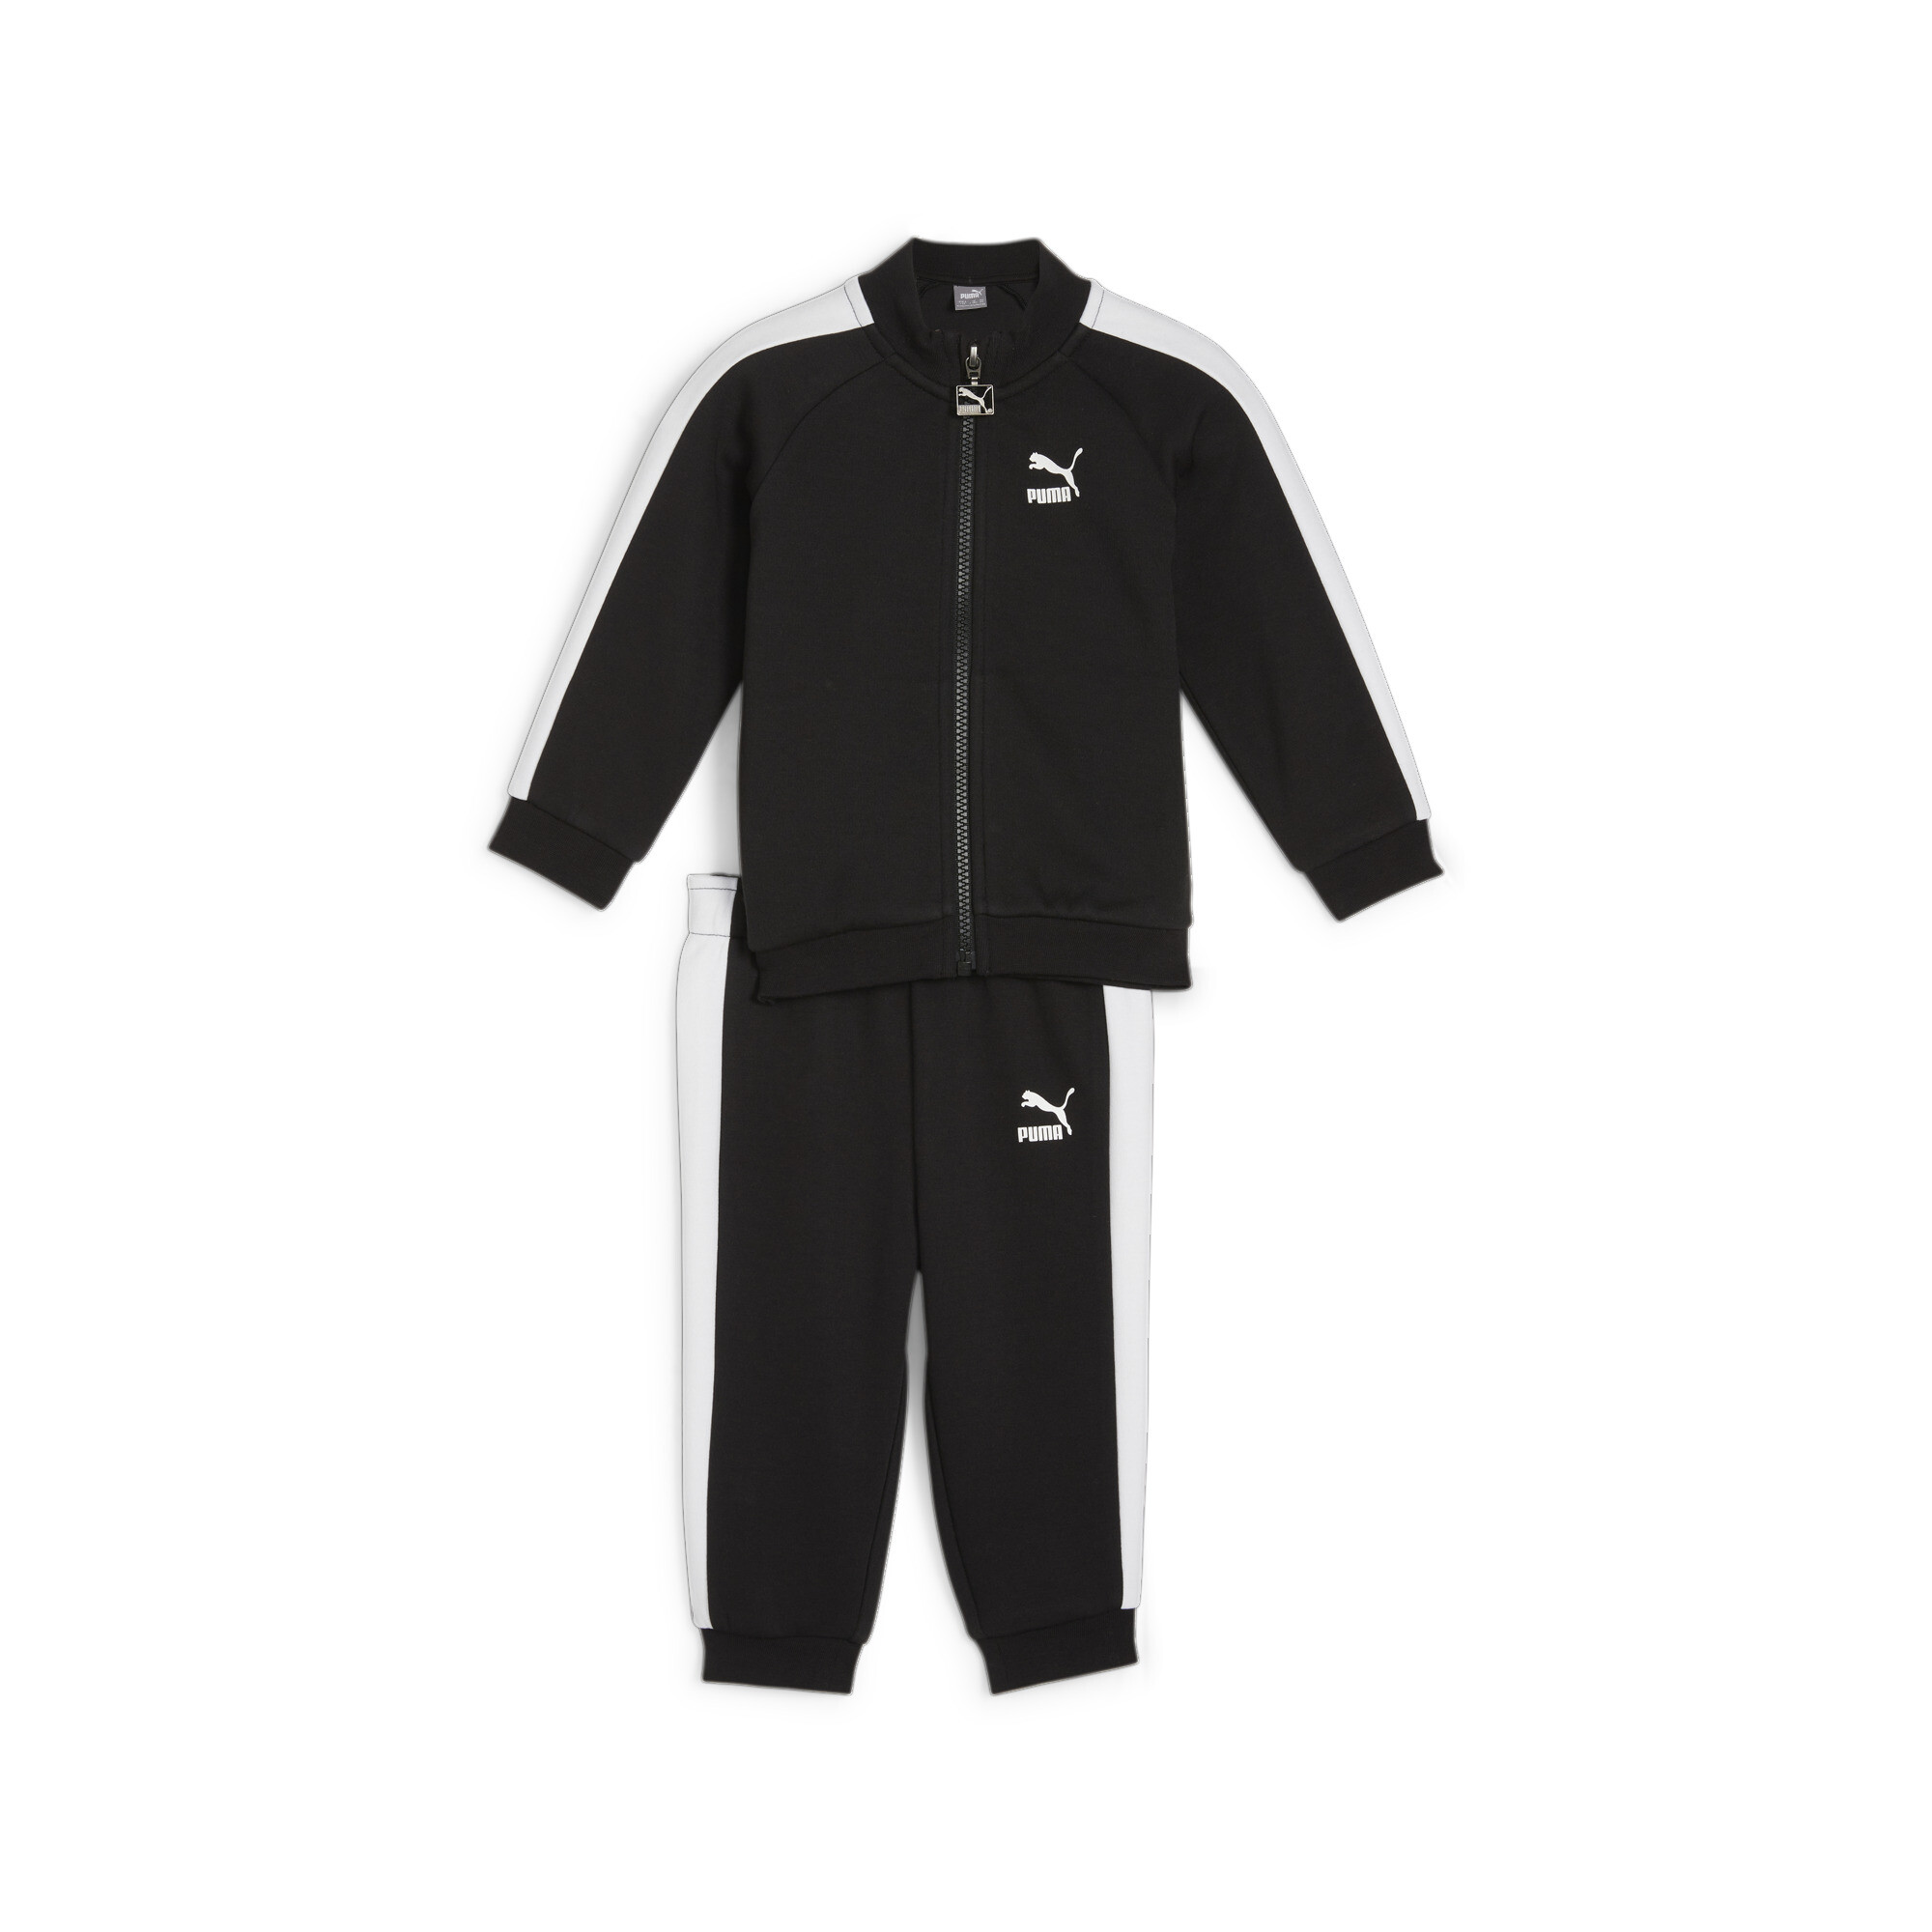 Kids' PUMA MINICATS T7 ICONIC Baby Tracksuit Set In Black, Size 9-12 Months